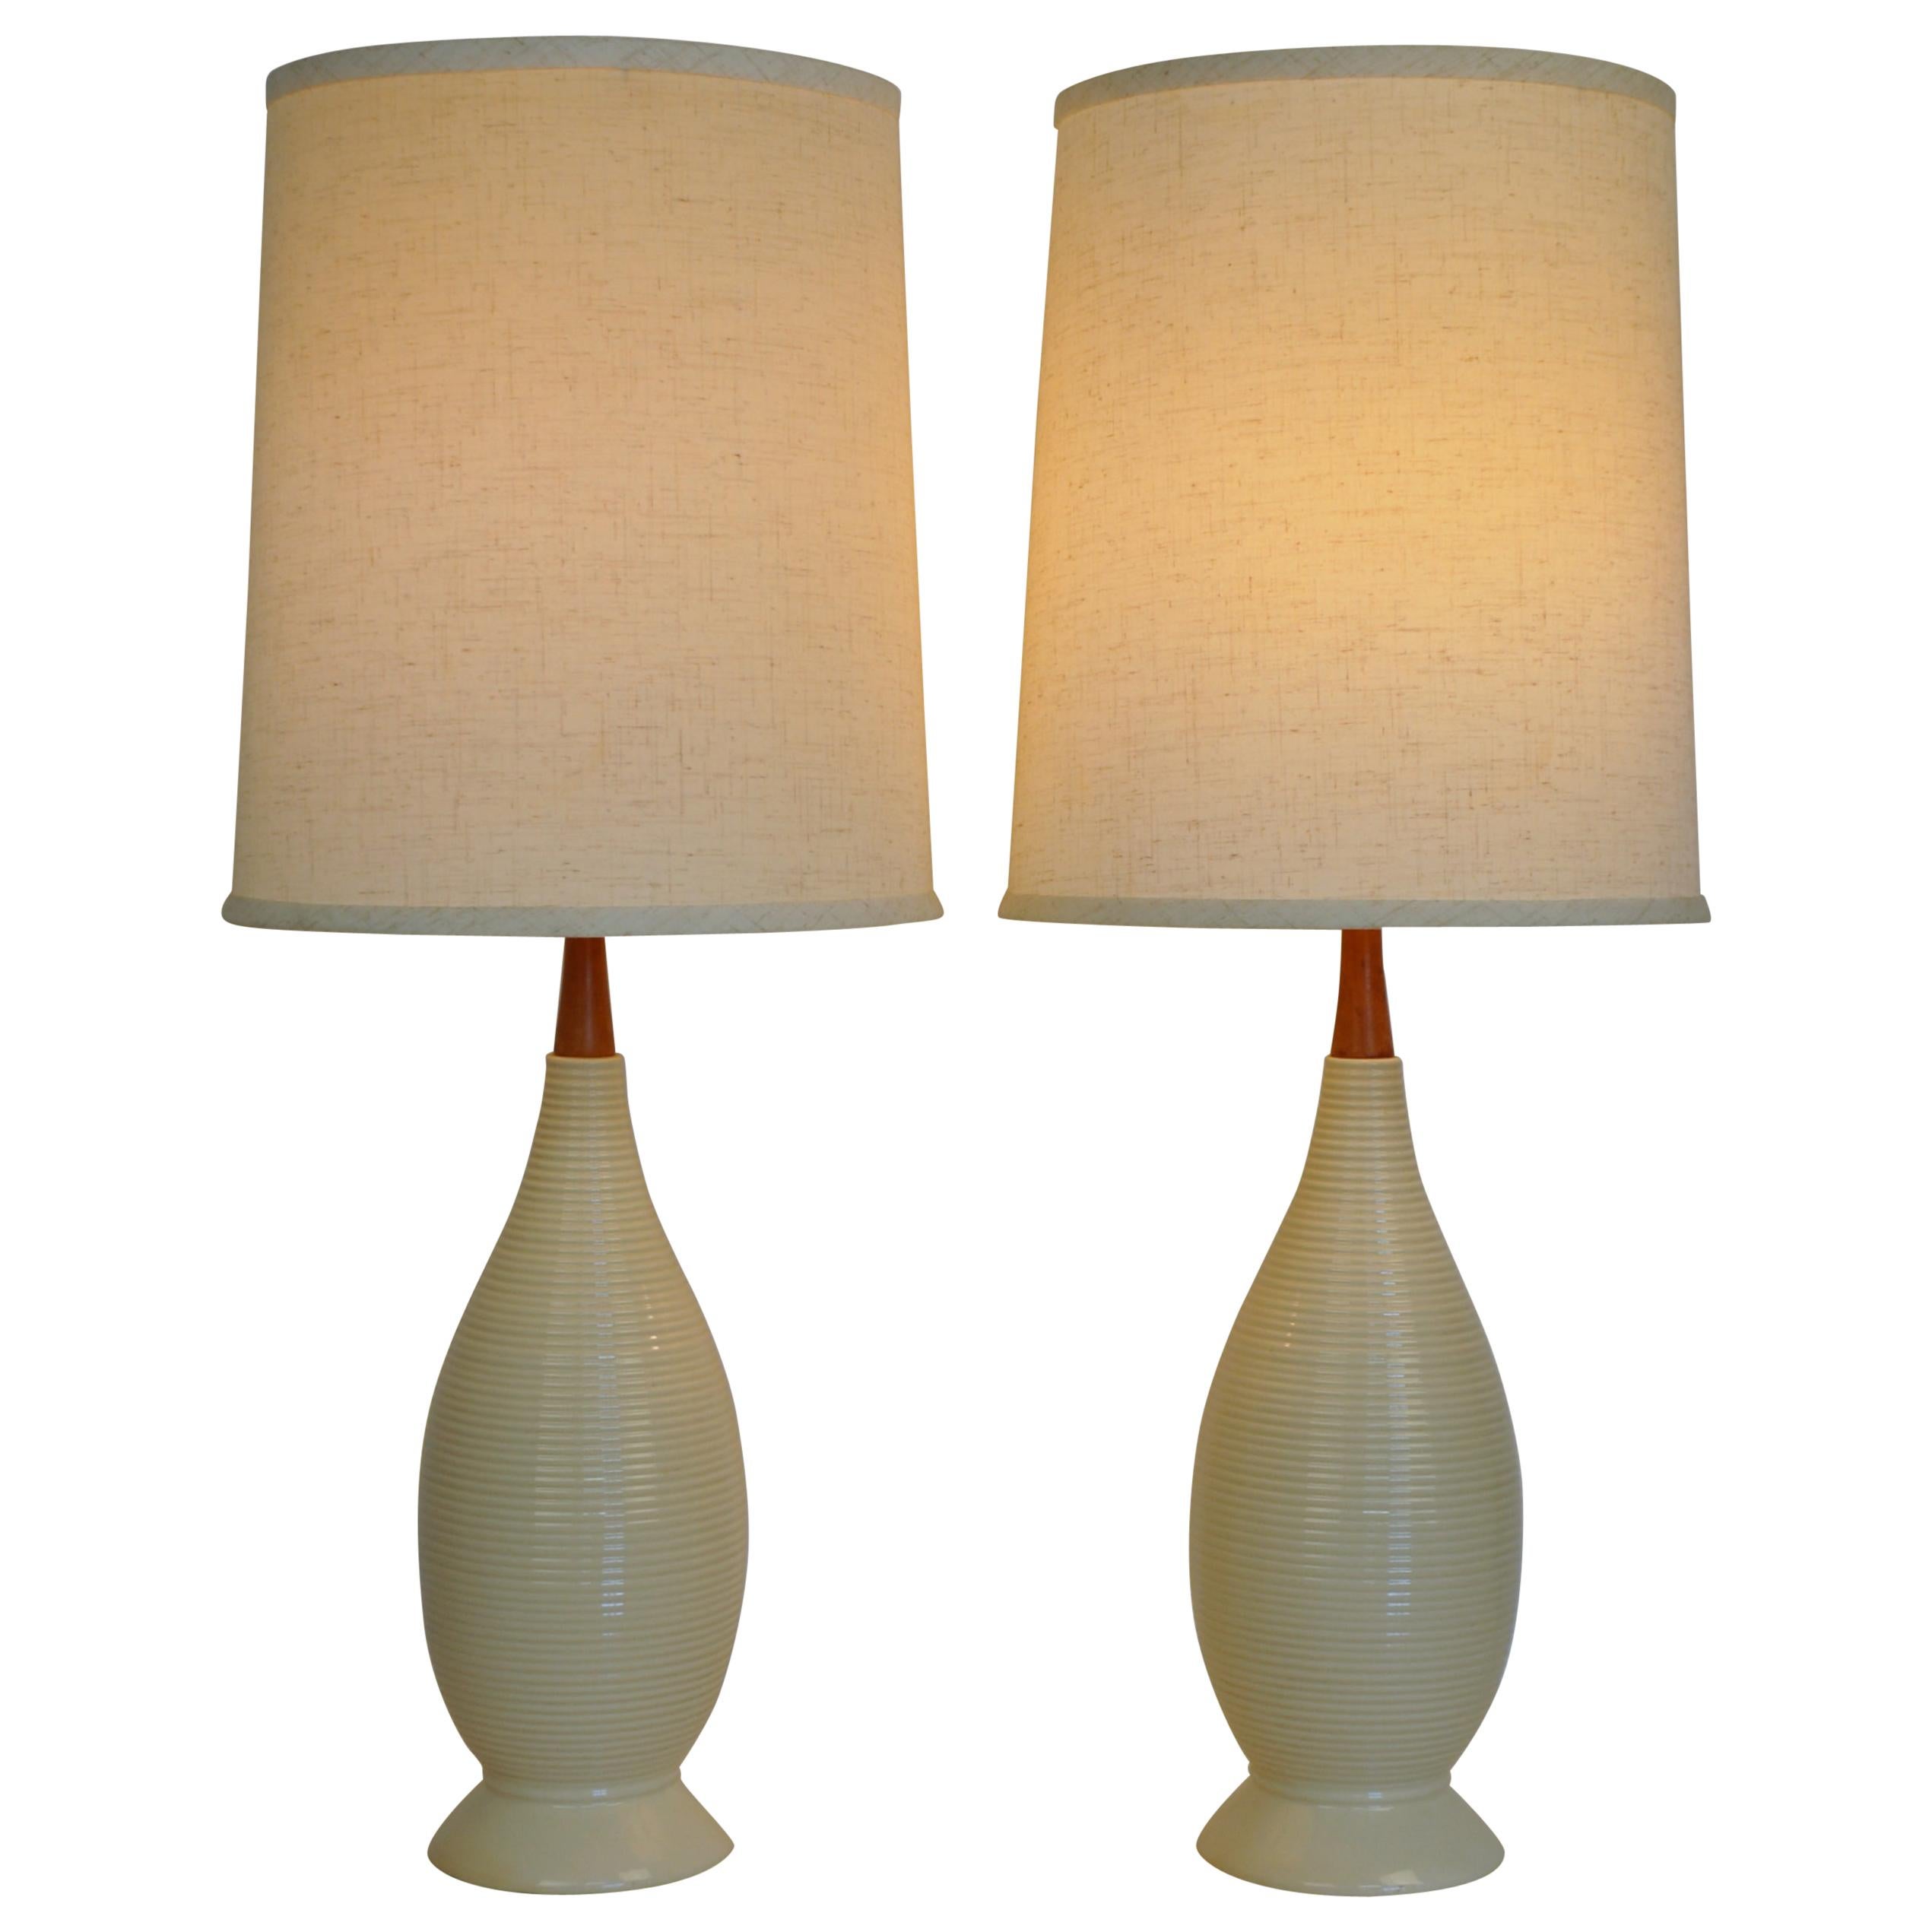 A vintage pair of large Mid-Century Modern off-white ceramic and teak table lamps, dating from the 1950s. Each earth tone lamp features a glazed cream body with ridges, a teak neck and a creamy white linen shade. Work well with all Scandinavian or